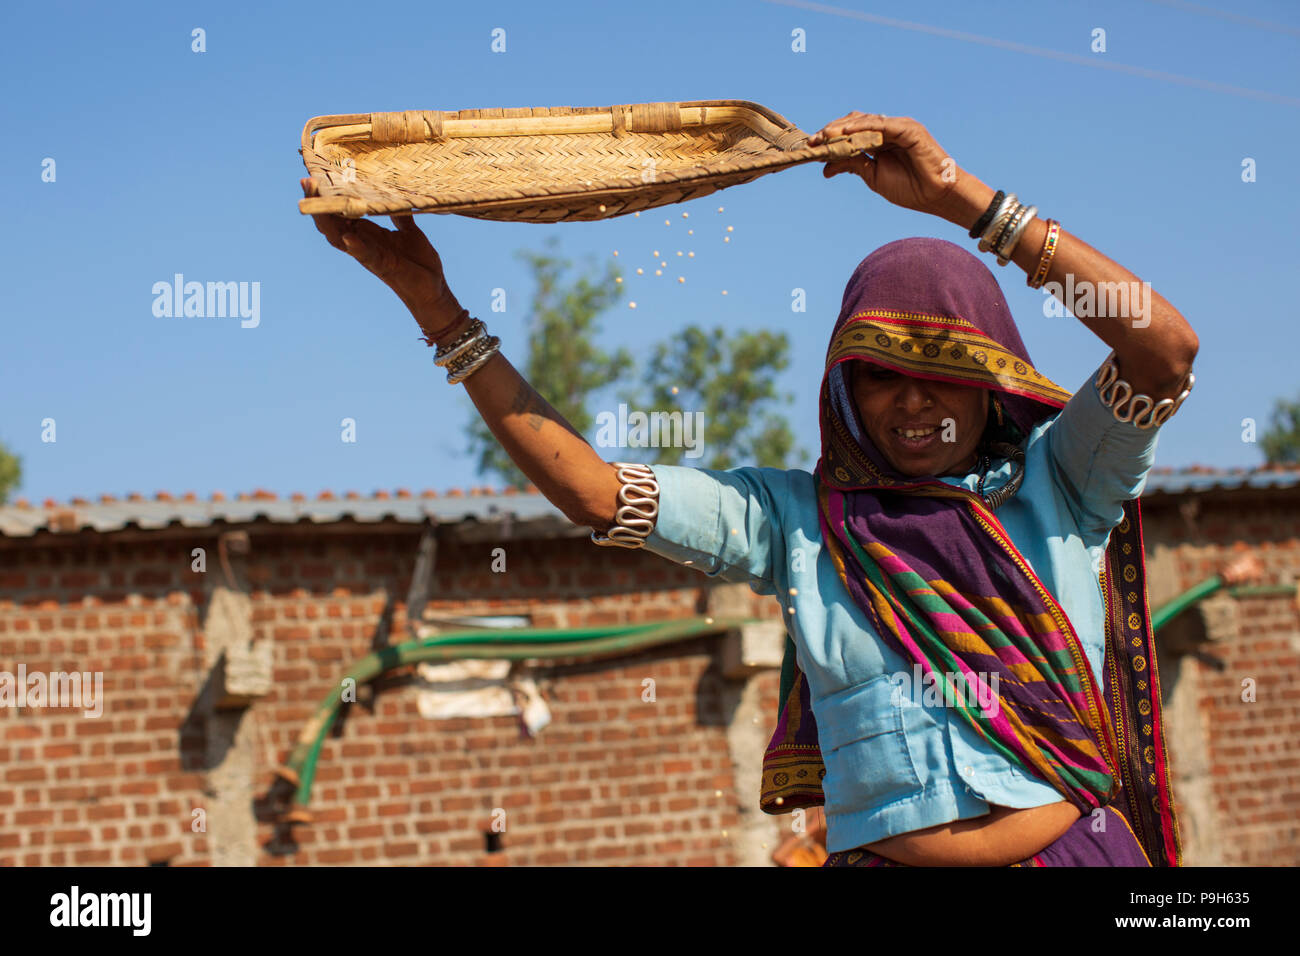 A woman sieving the dust and husks out of her grain in rural India. Stock Photo